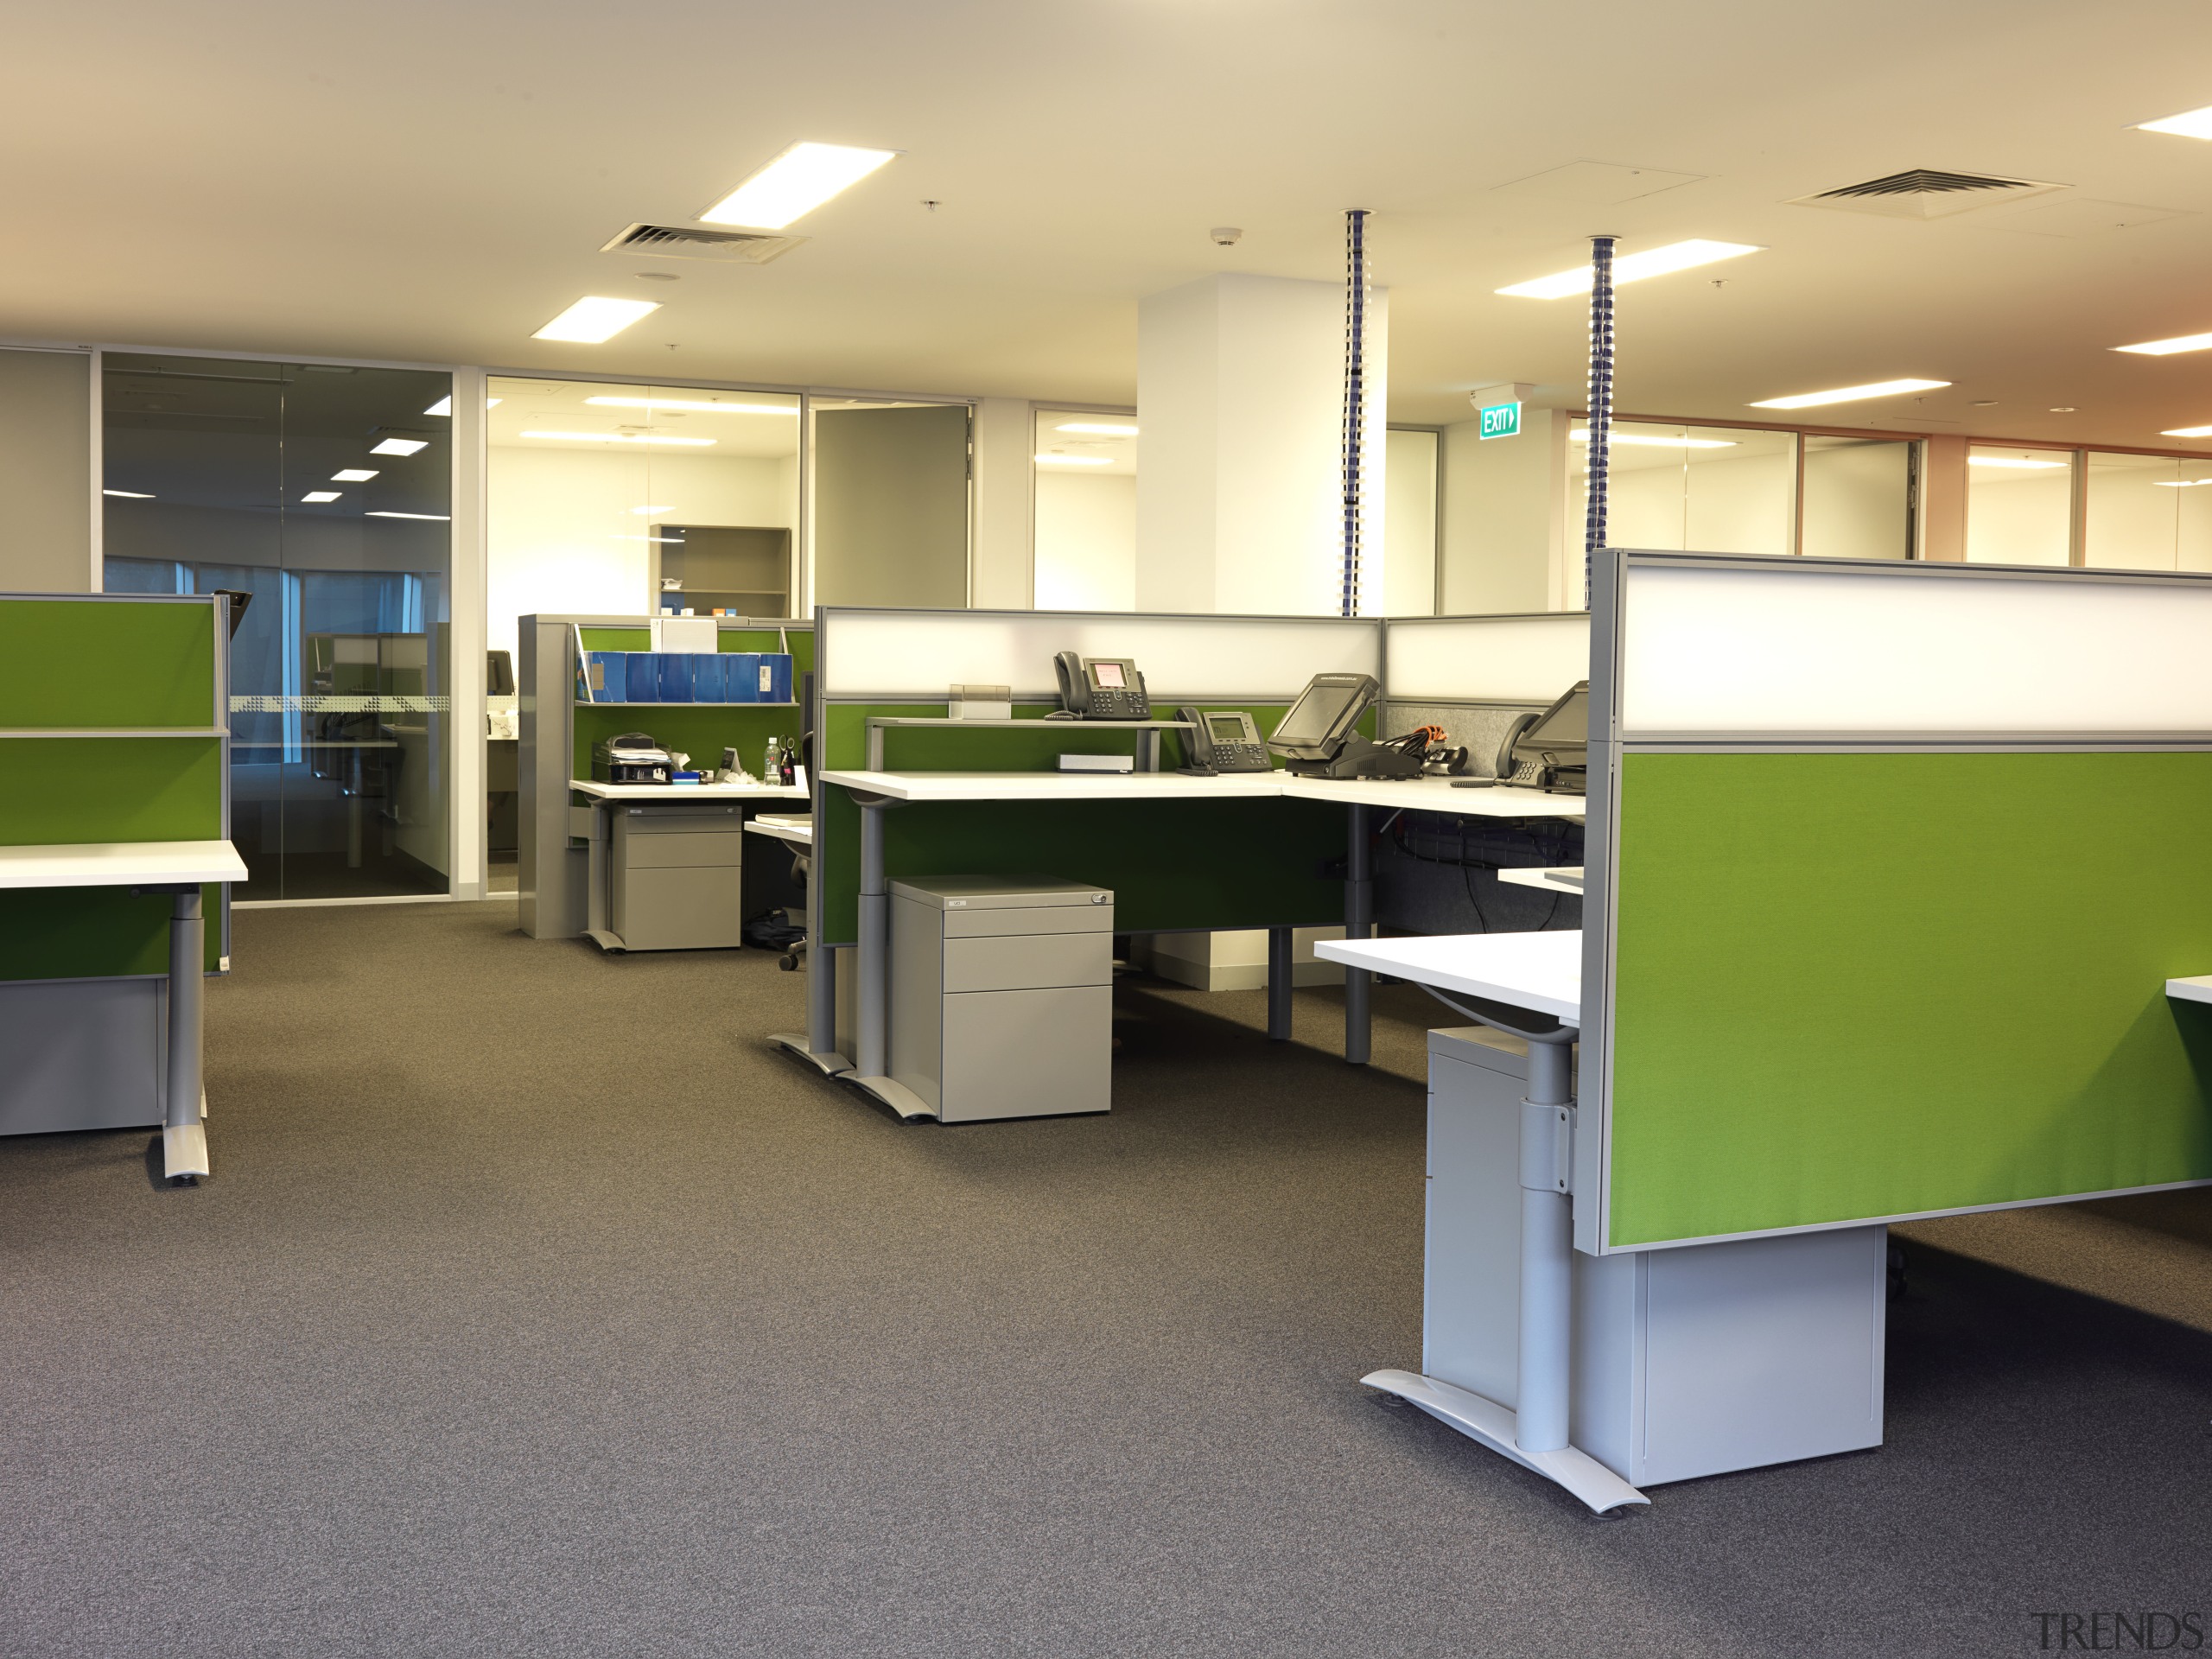 View of an office area within the MCC desk, floor, flooring, furniture, interior design, office, product, orange